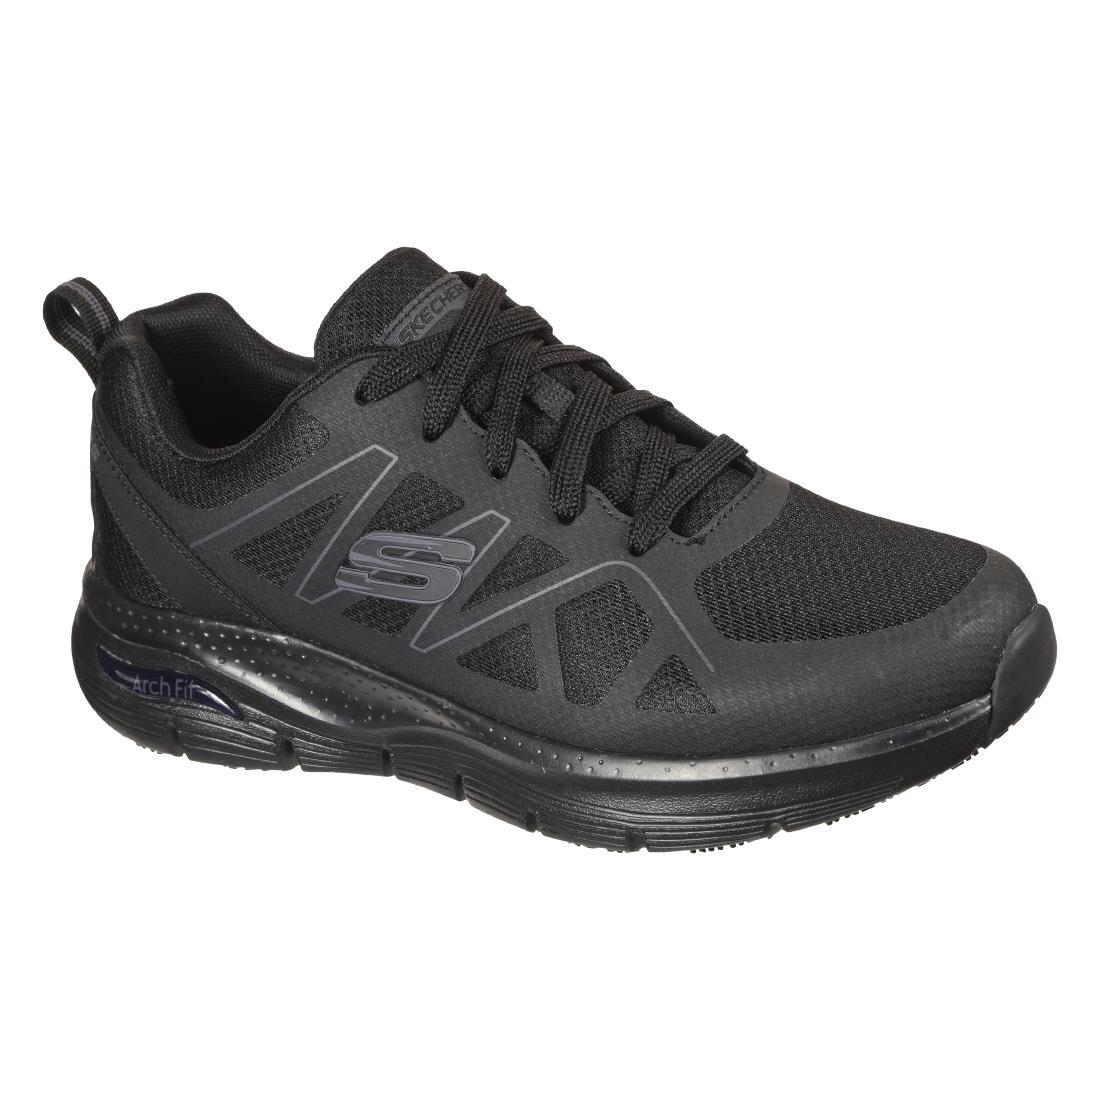 Skechers Axtell Slip Resistant Arch Fit Trainer Size 41 - BB673-41  - 1